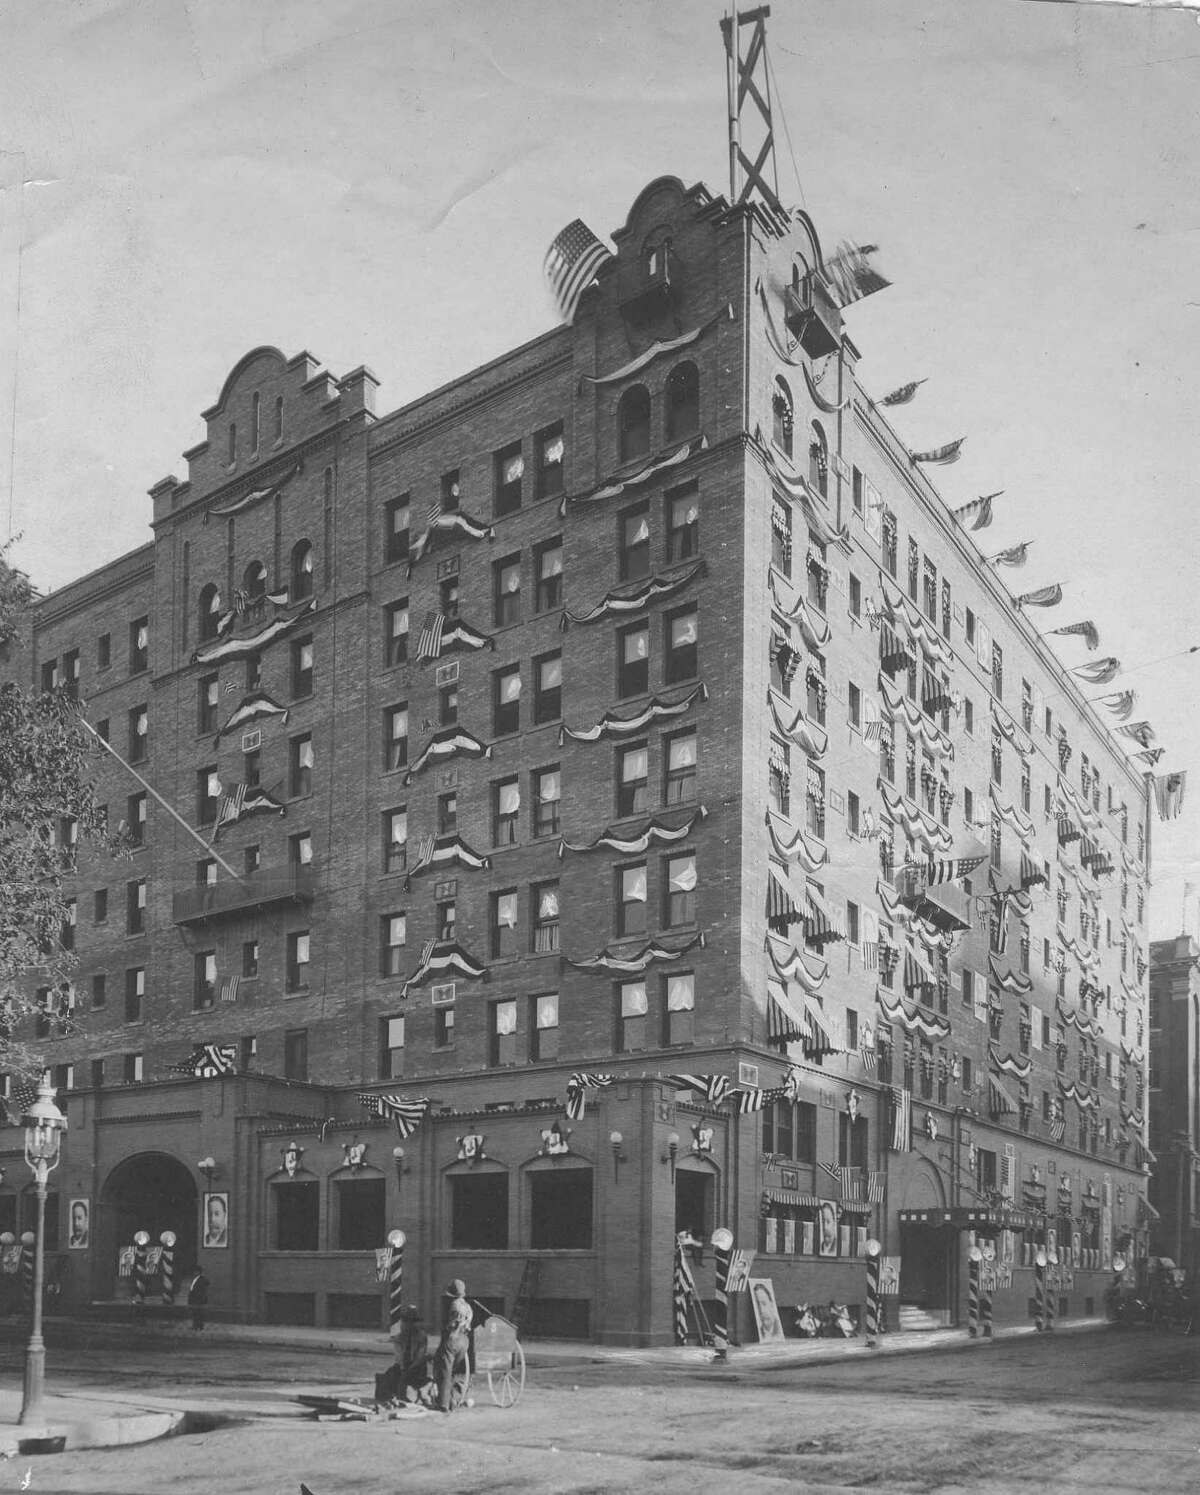 The St. Anthony Hotel is shown decked out in flags, bunting and pictures of President William Howard Taft in celebration of his visit to San Antonio on Oct. 17, 1909. Taft stayed at the hotel. Published in the Express, October 17, 1909.